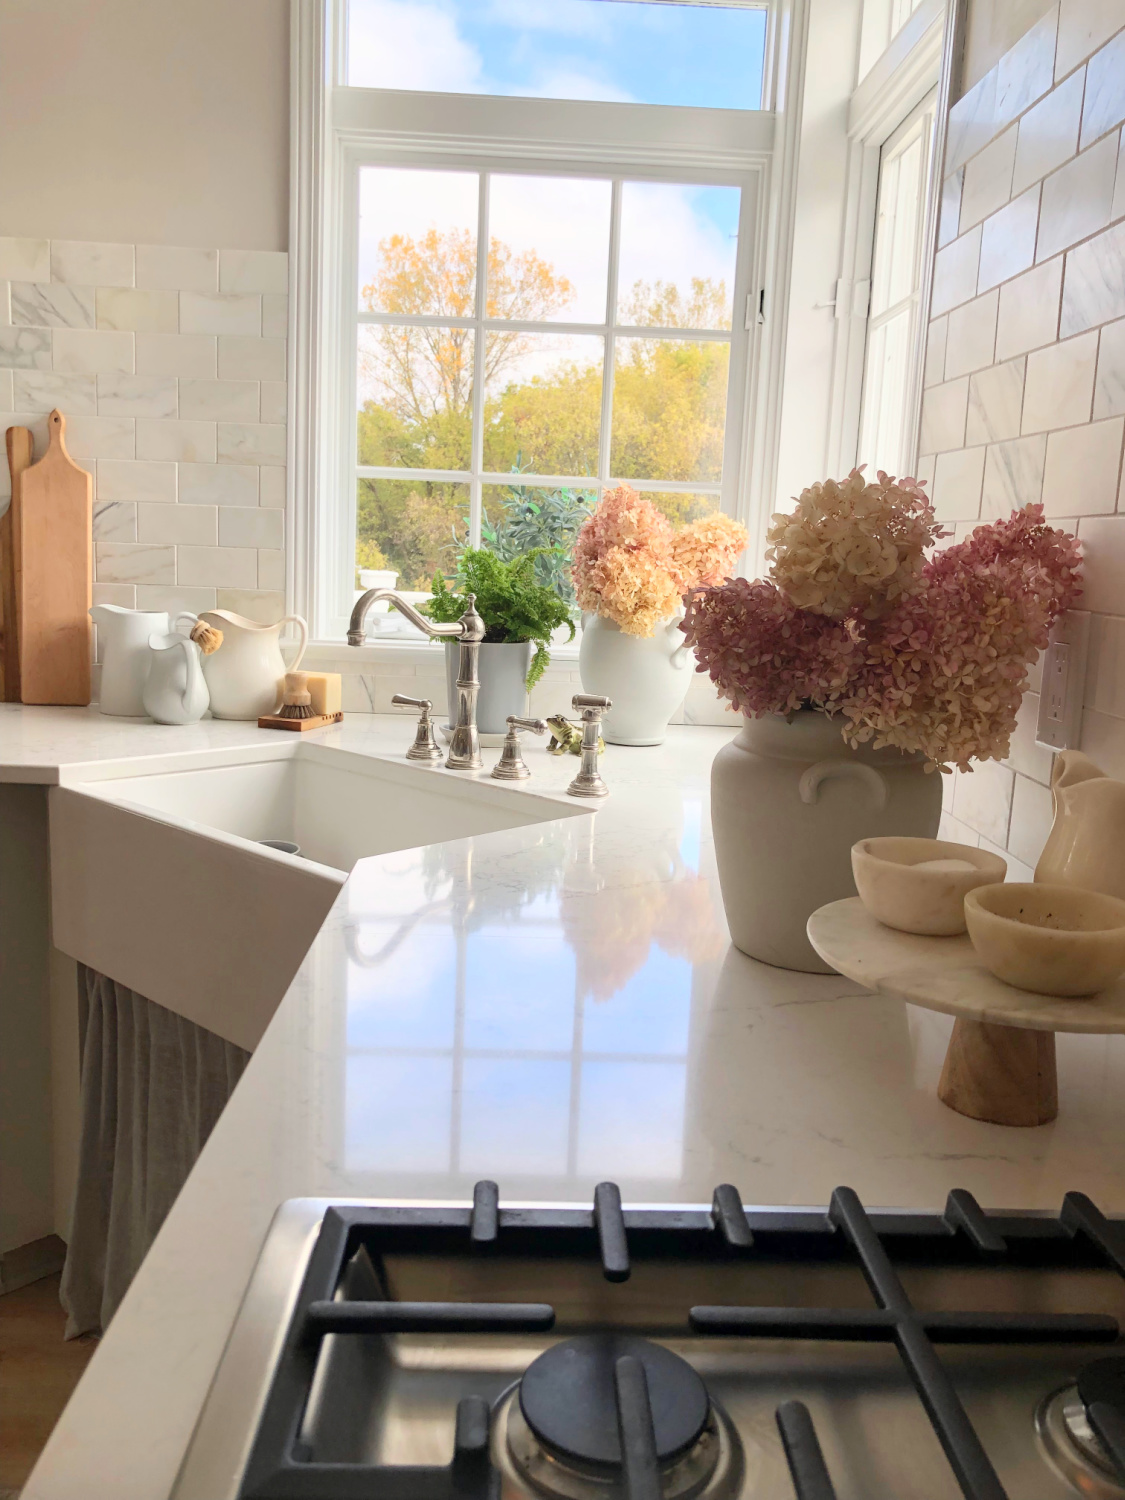 Hello Lovely's fall kitchen with modern French serene style, light gray cabinets, Viatera Muse counter, and farm sink with linen skirt. #modernfrench #serenekitchen